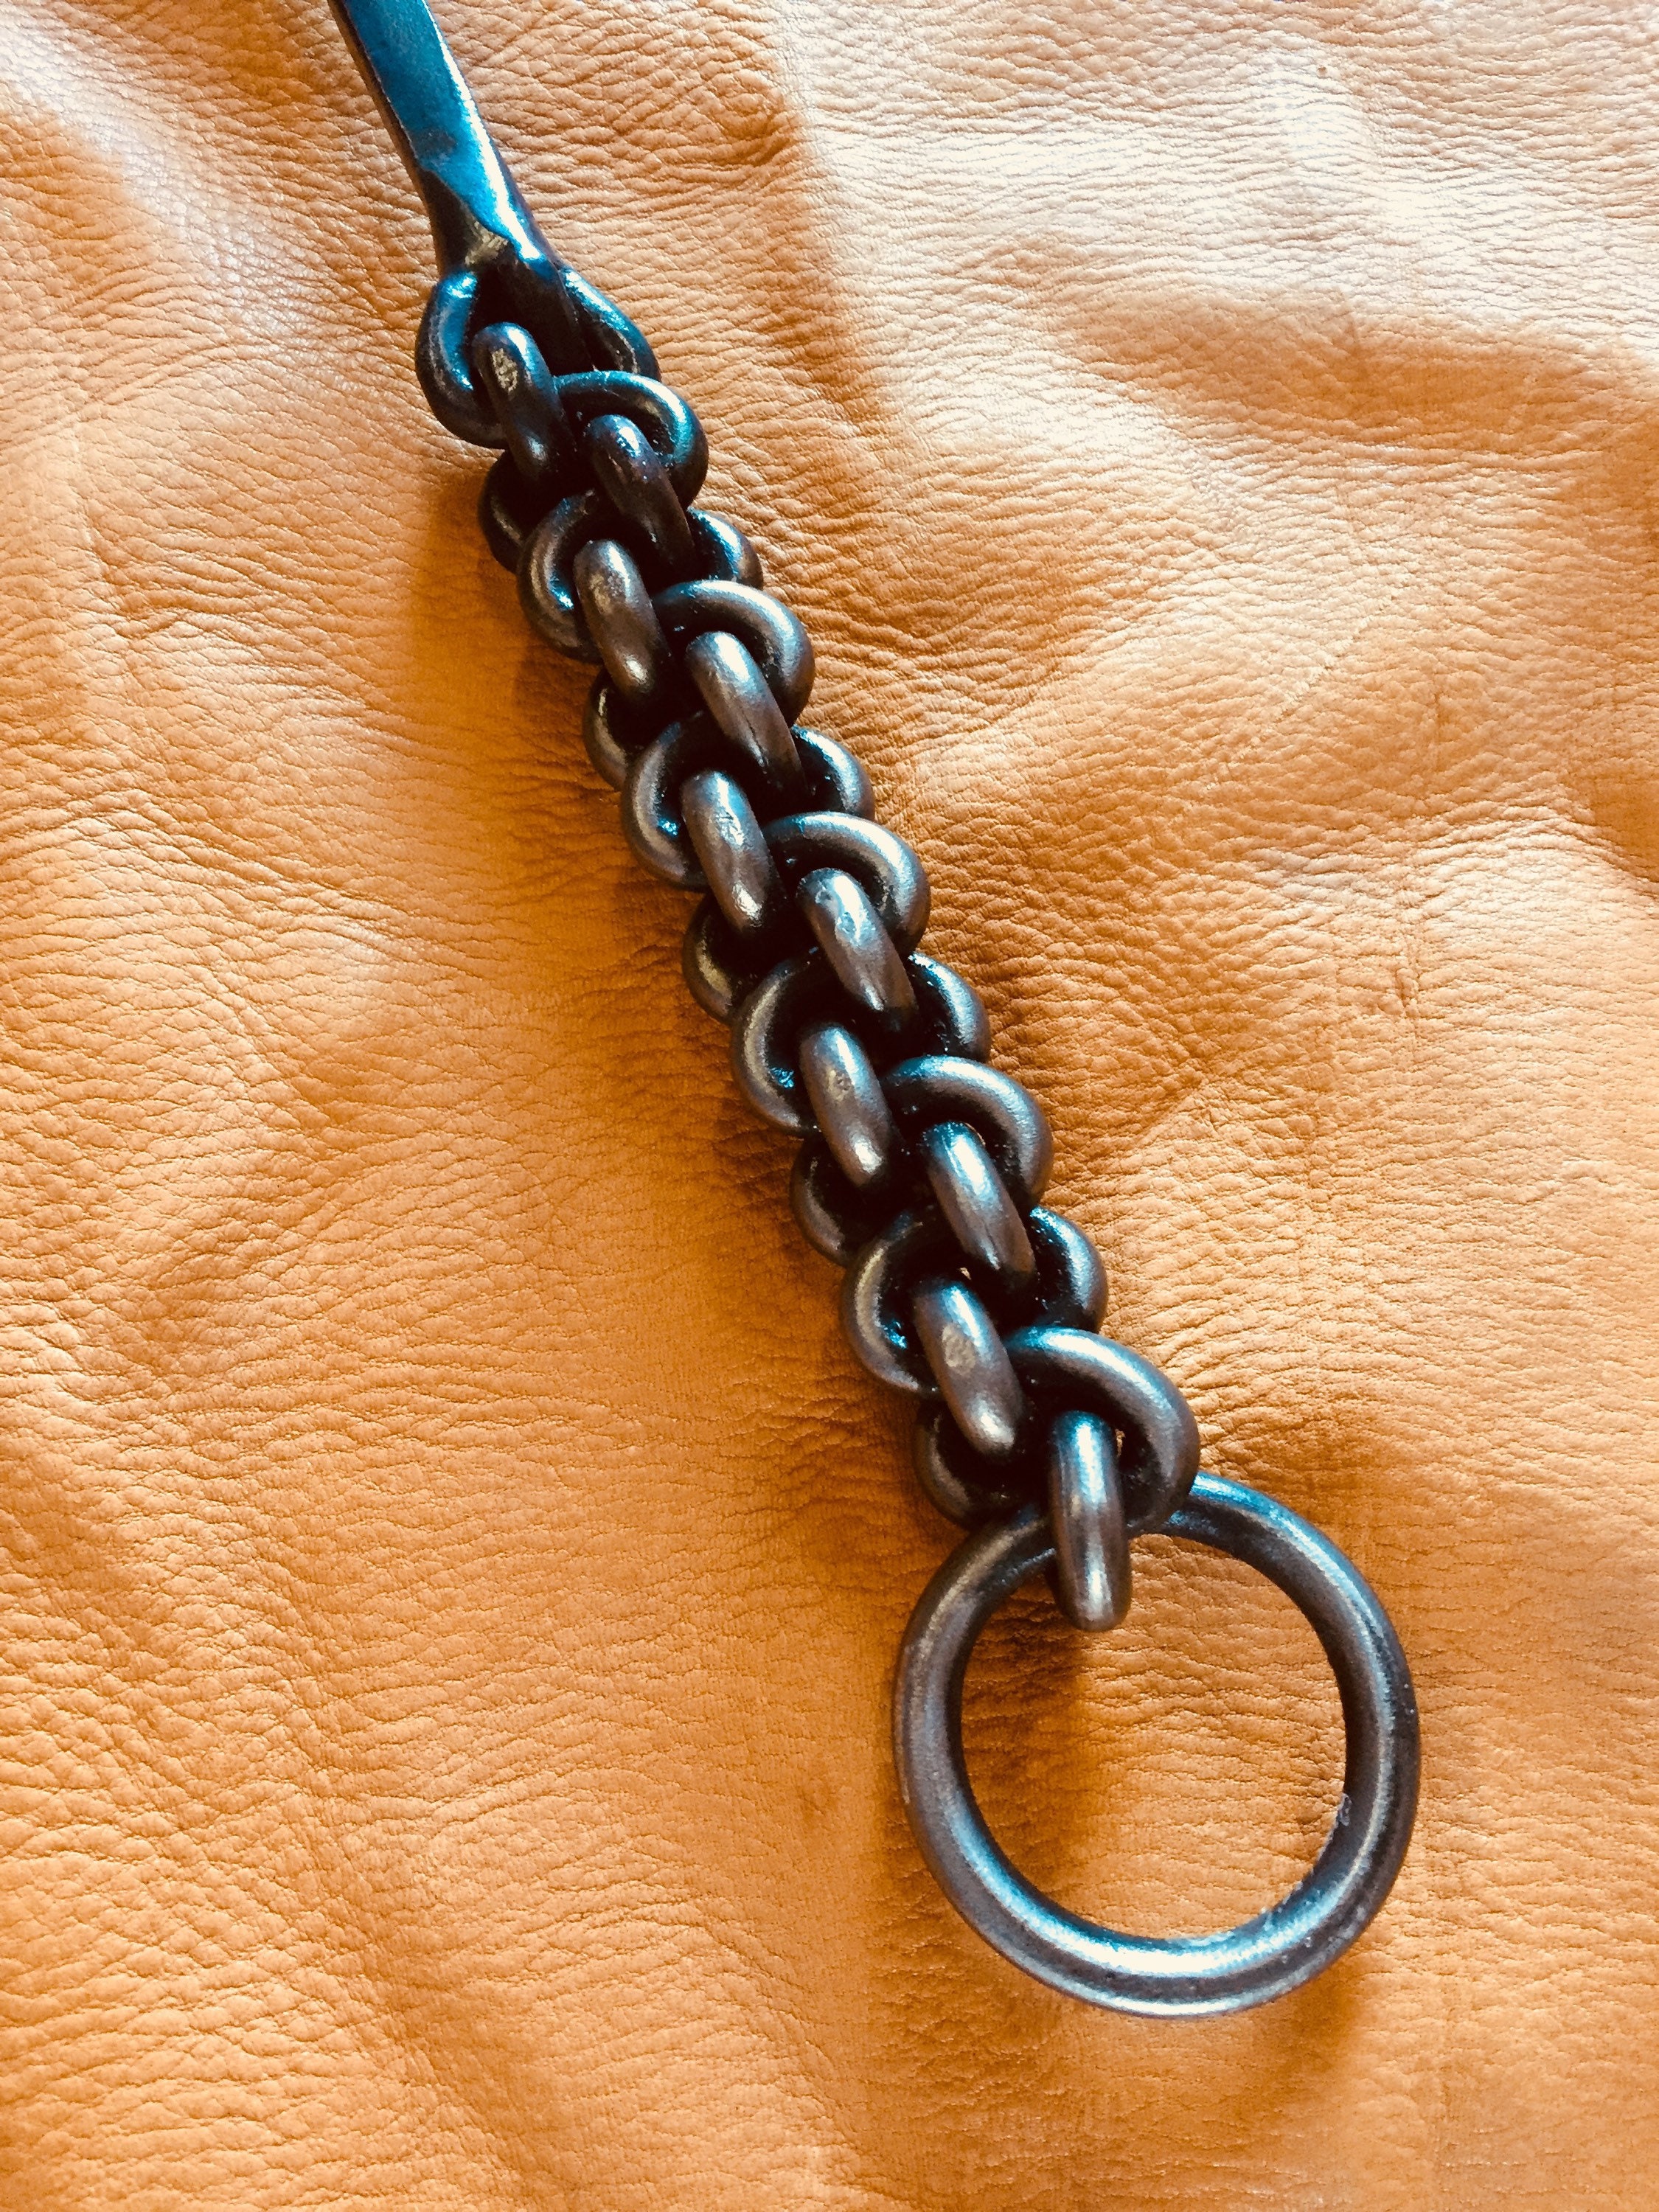 Dutch Oven Lid Lifter, Braided Handle 